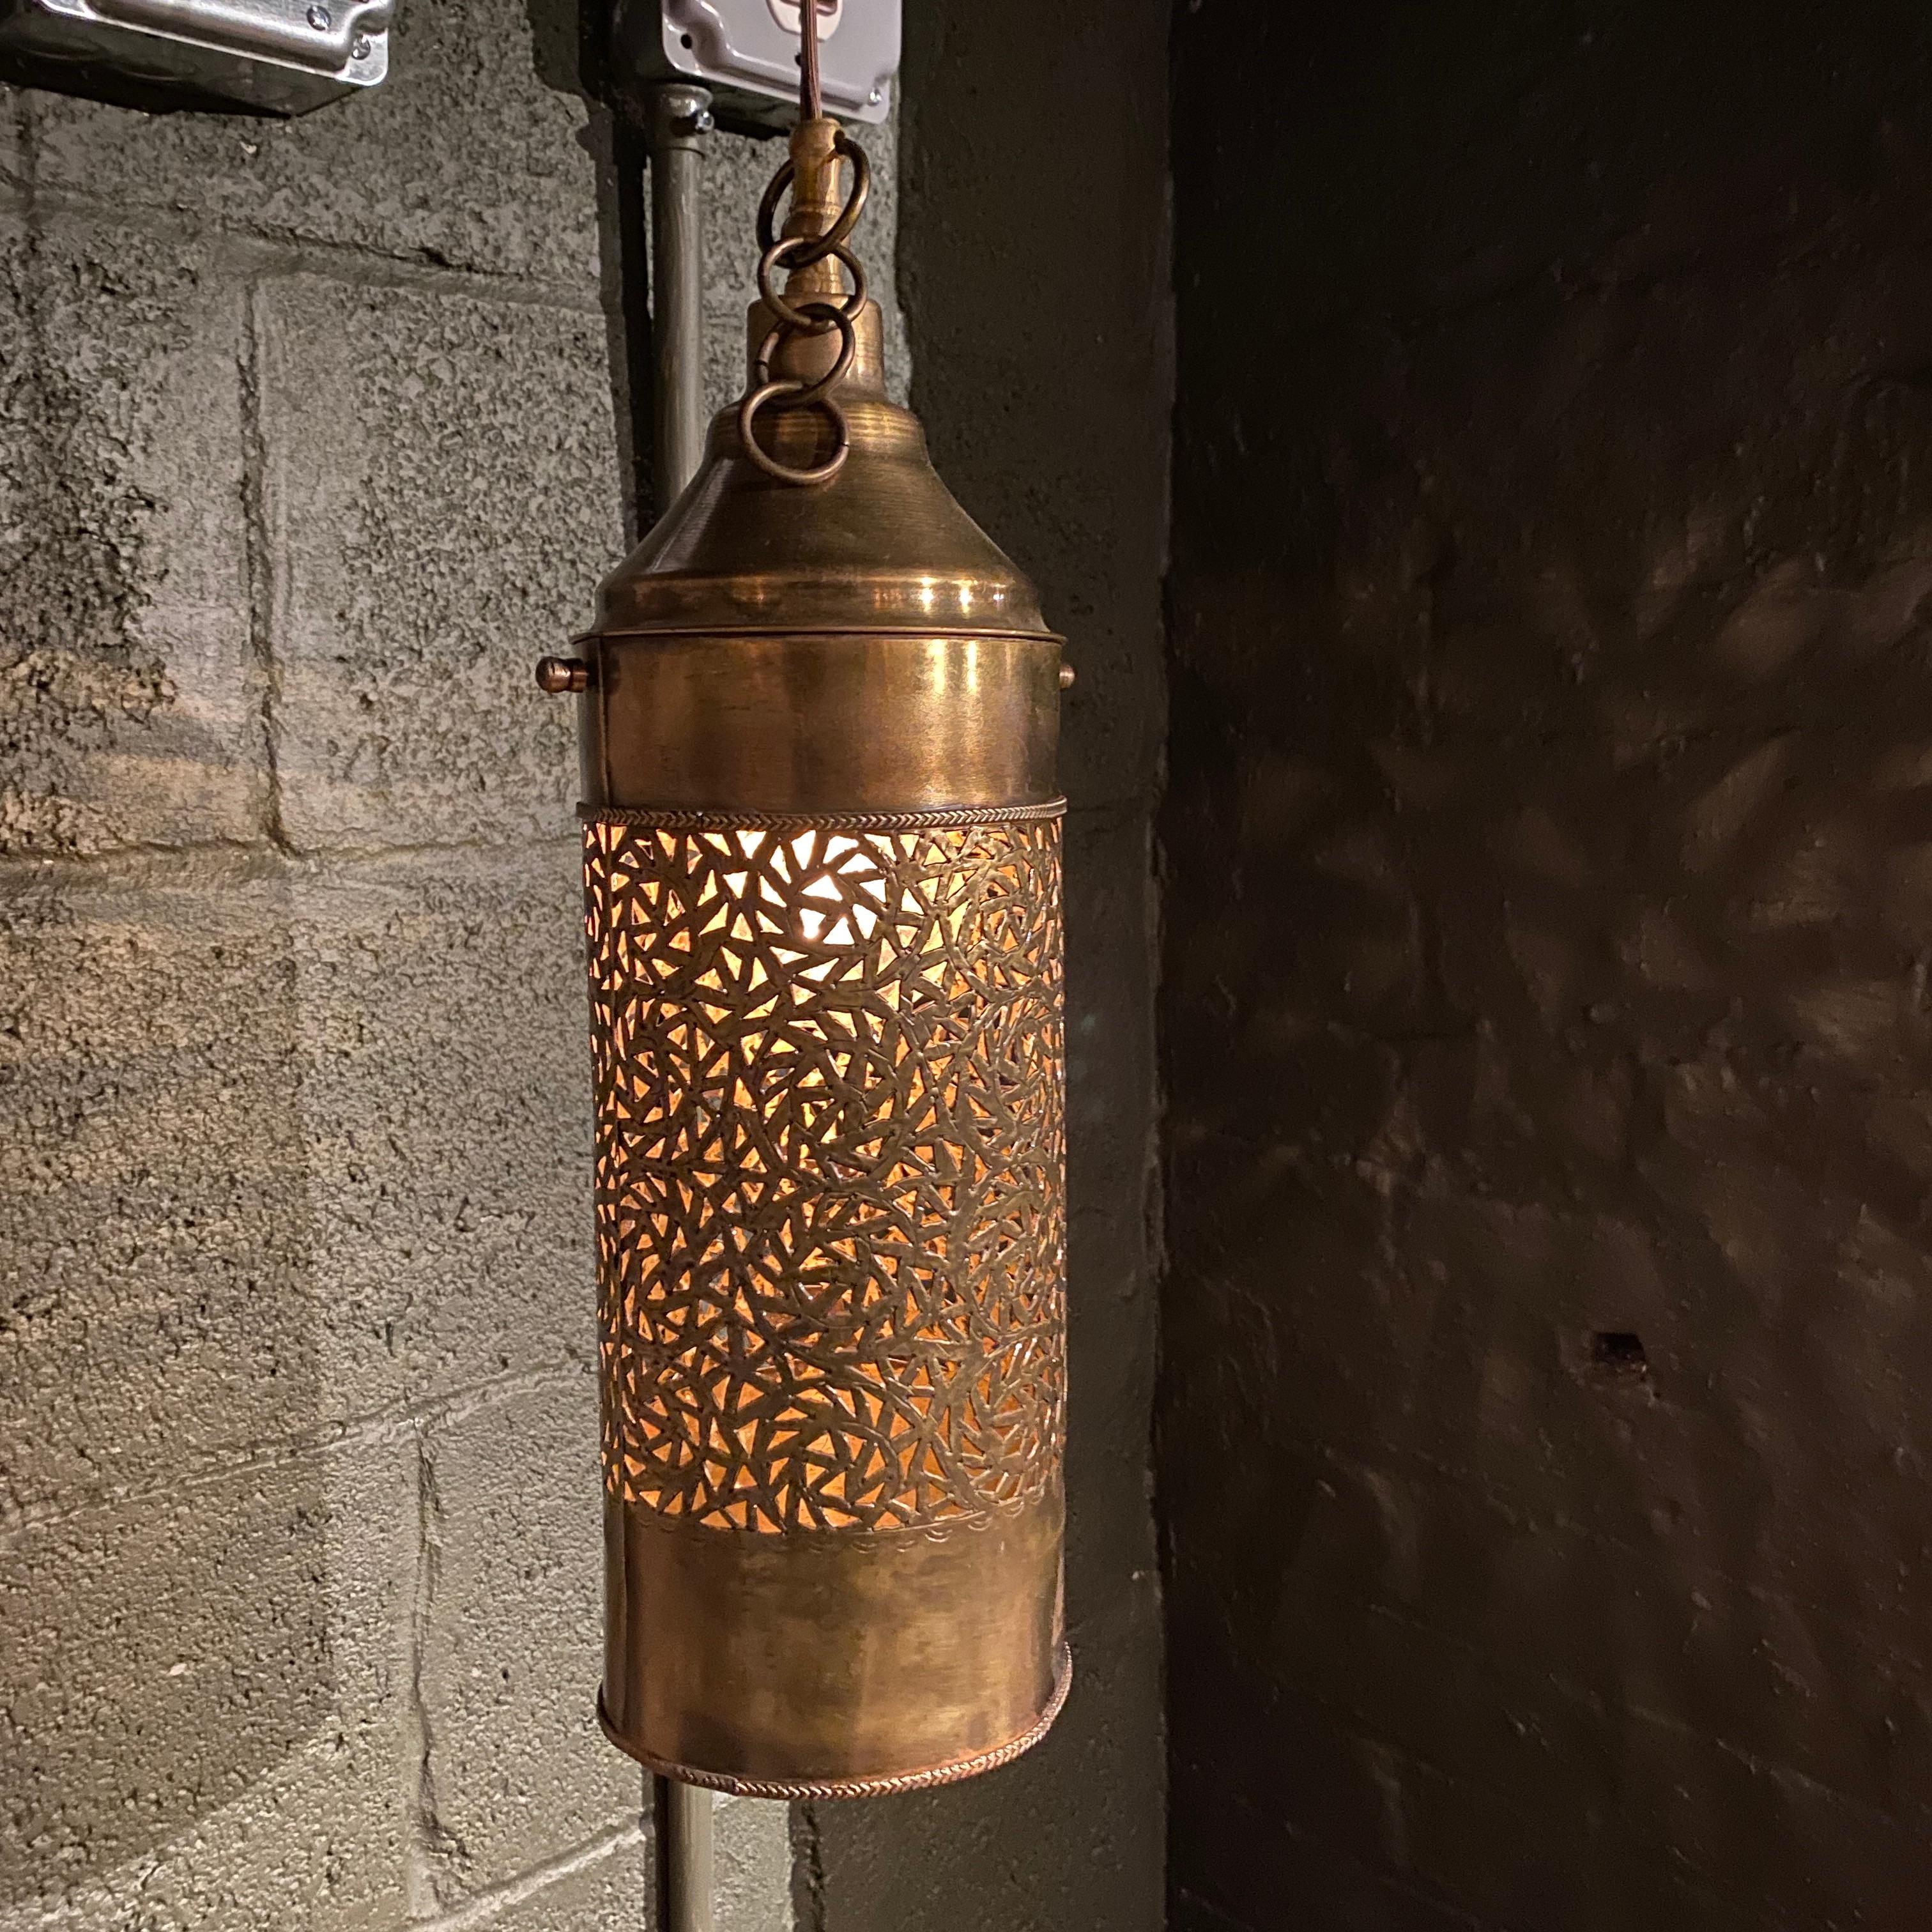 This brass pendant displays beautifully carved design on the body. When lit, it illuminates the design even more drawing your attention. This piece pays close attention to detail and will be the talk of every guest who comes in contact with it.